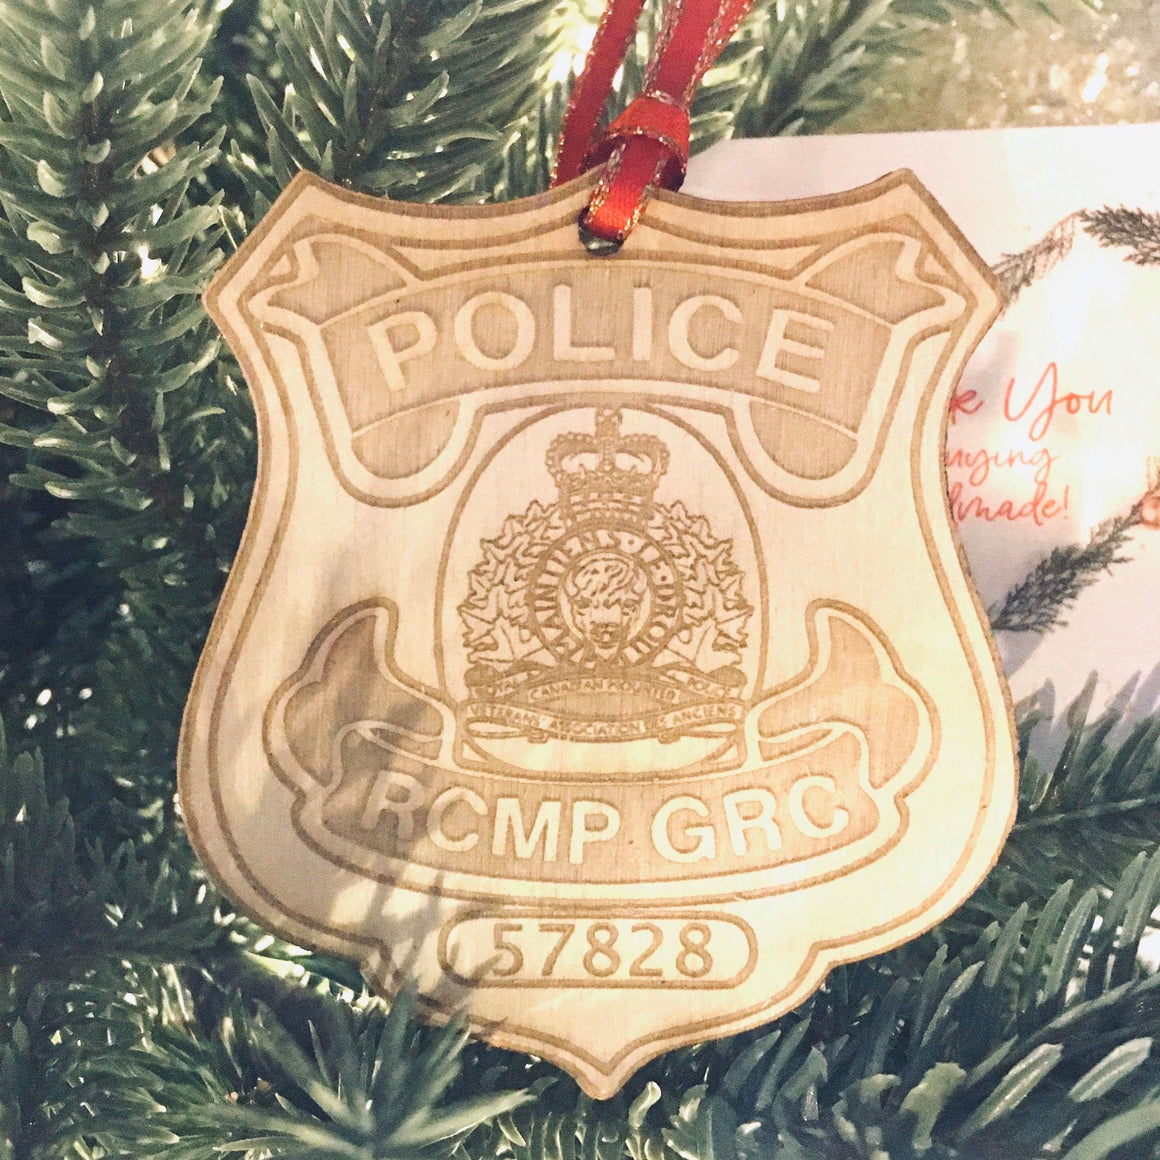 RCMP badge laser cut onto wood with a red and gold ribbon hanging on a tree